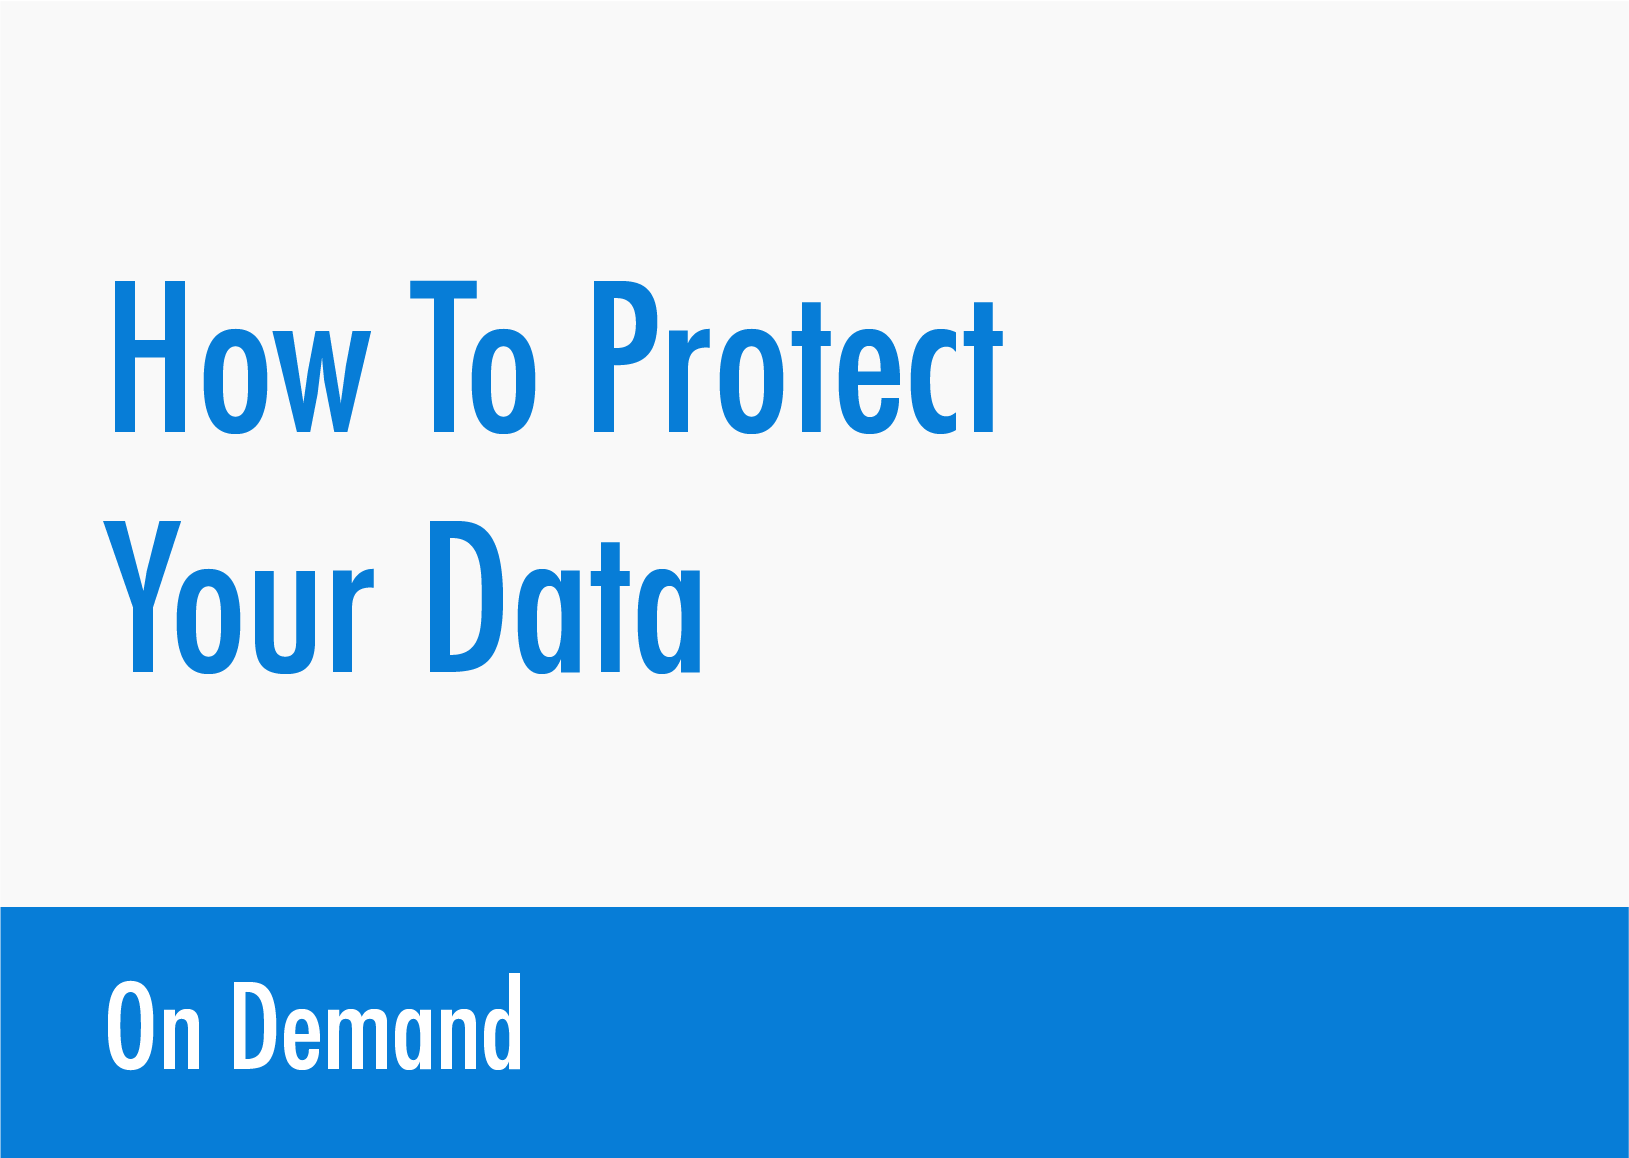 How to protect your data